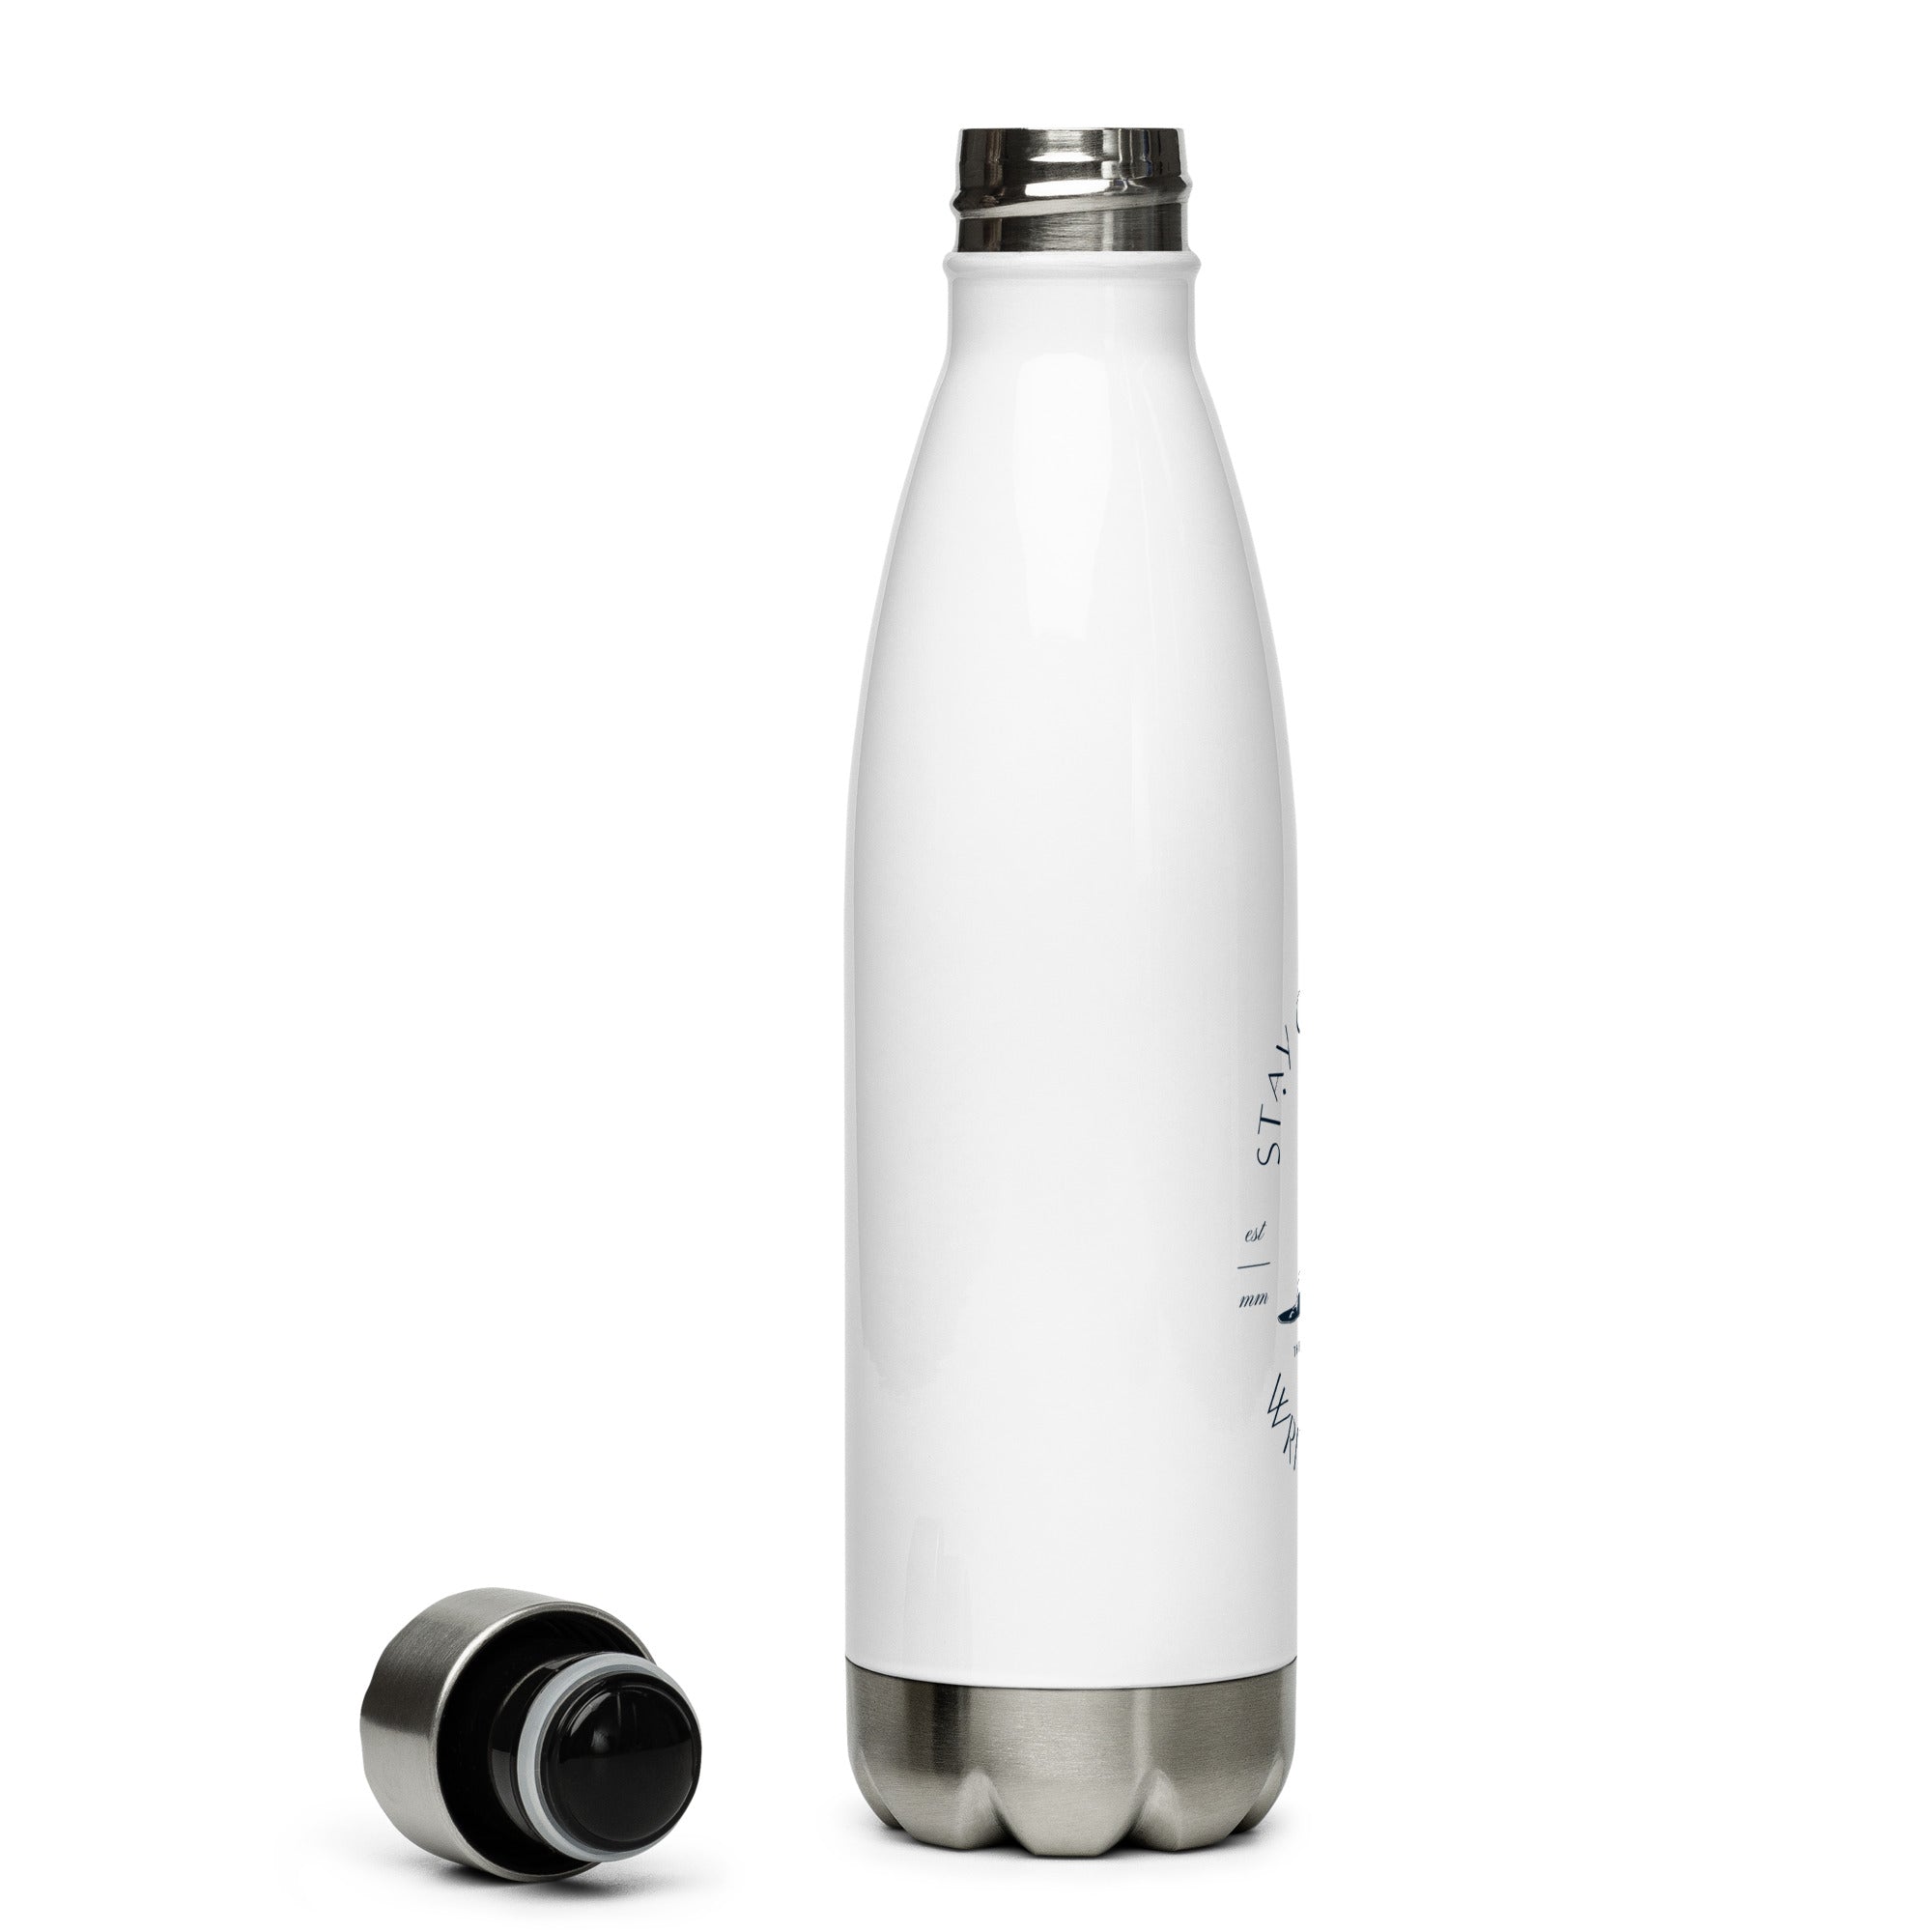 Stay Curious, Write On Water Bottle